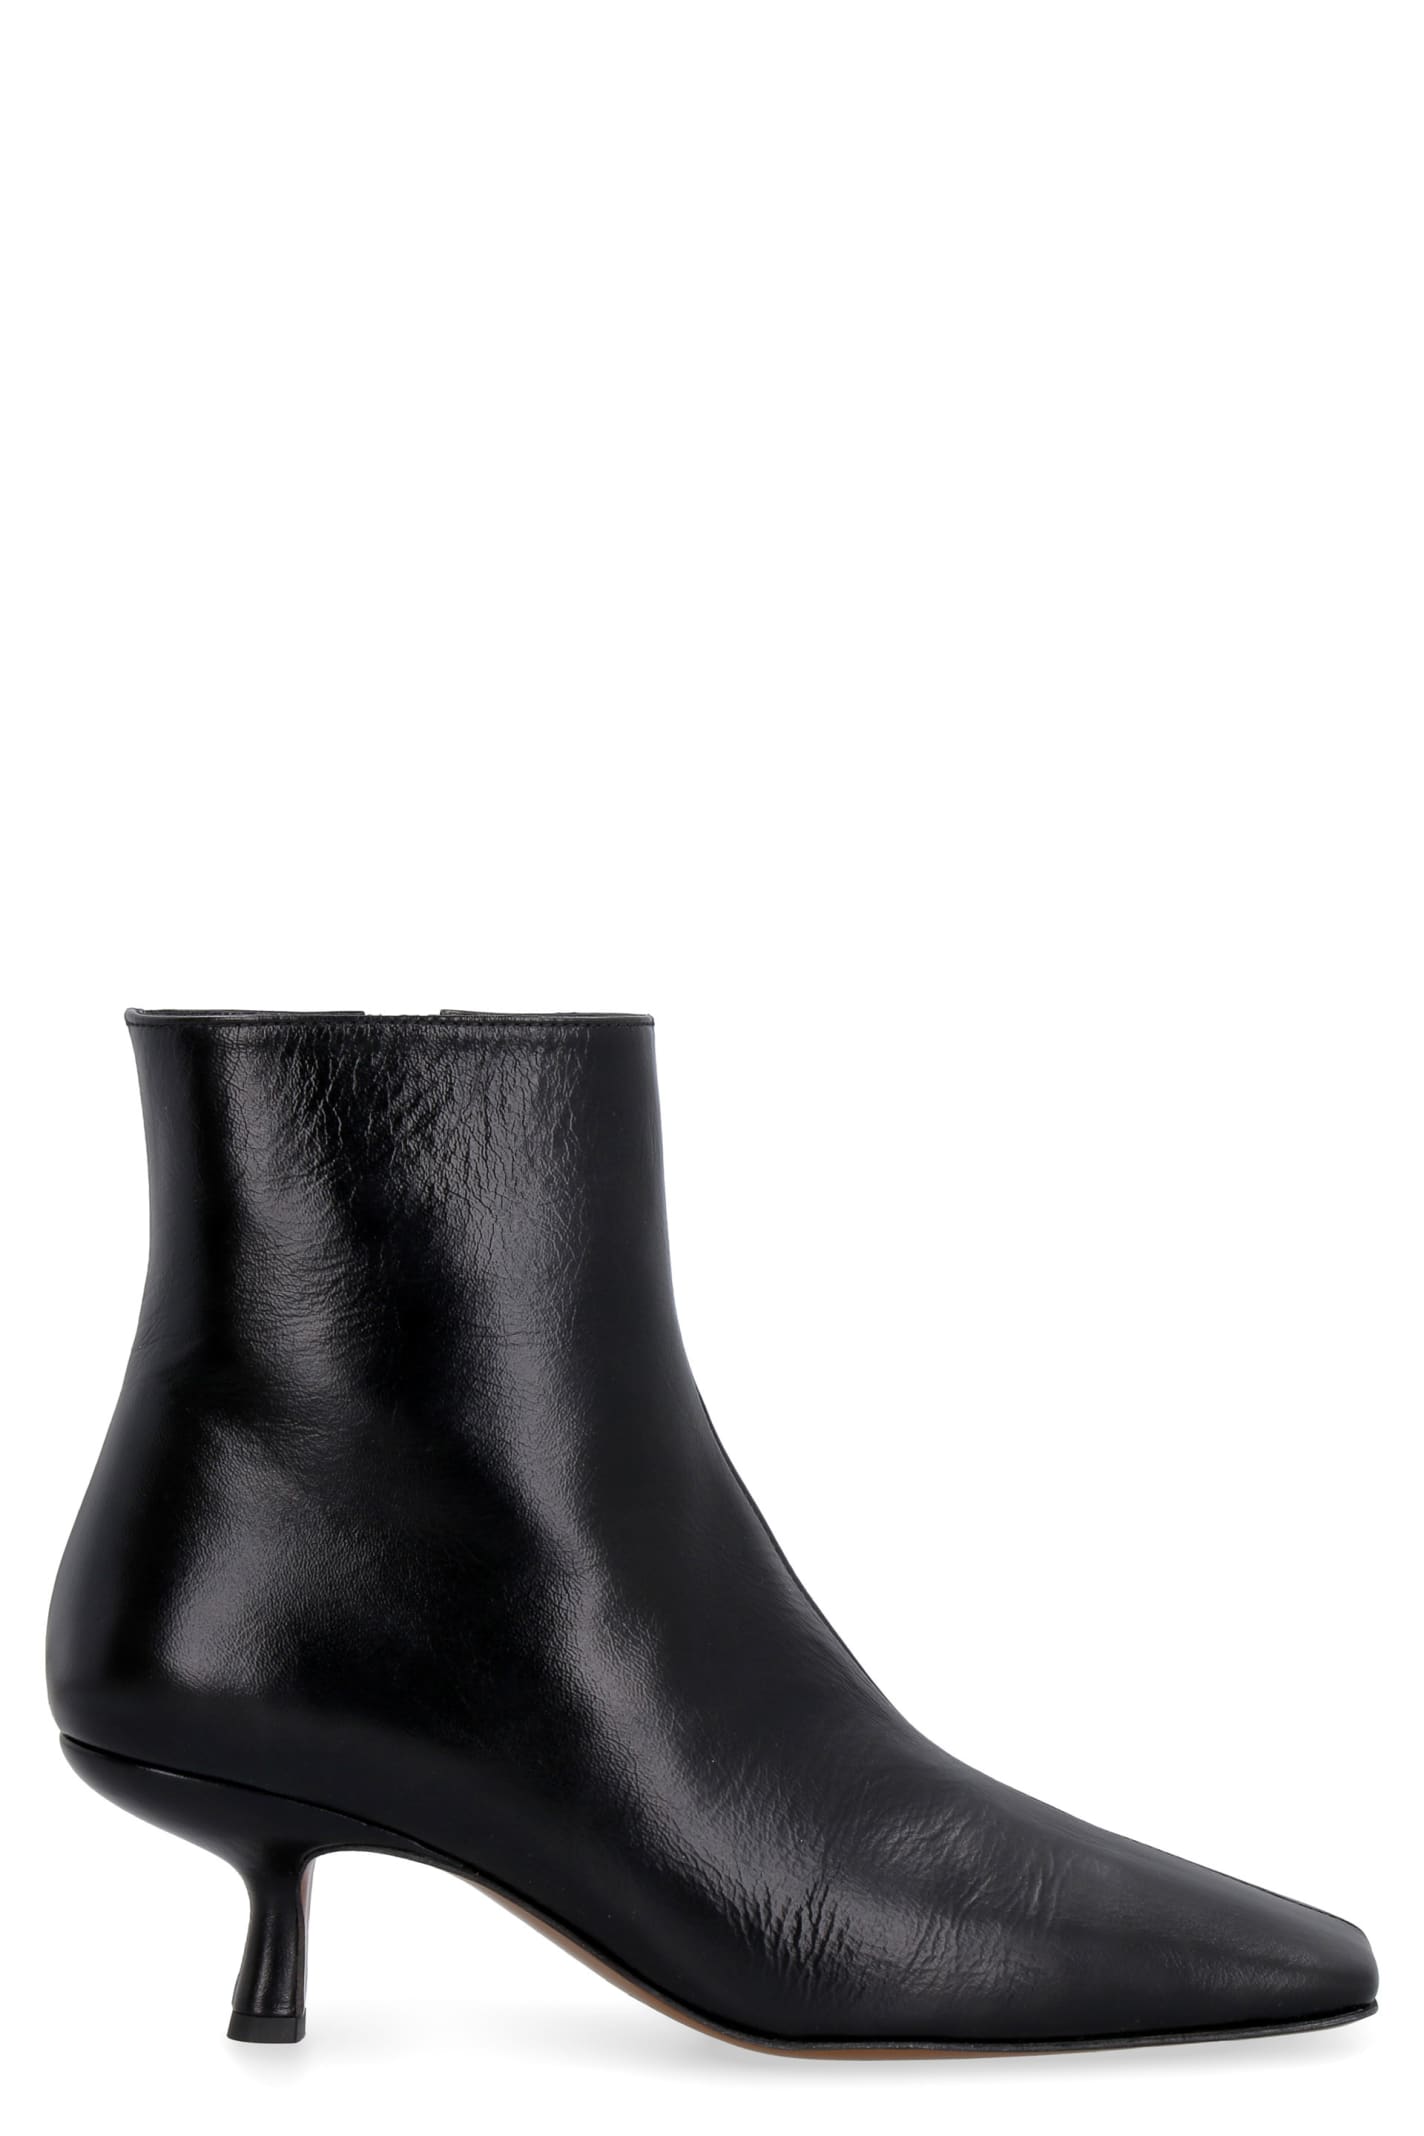 BY FAR Leather Ankle Boots